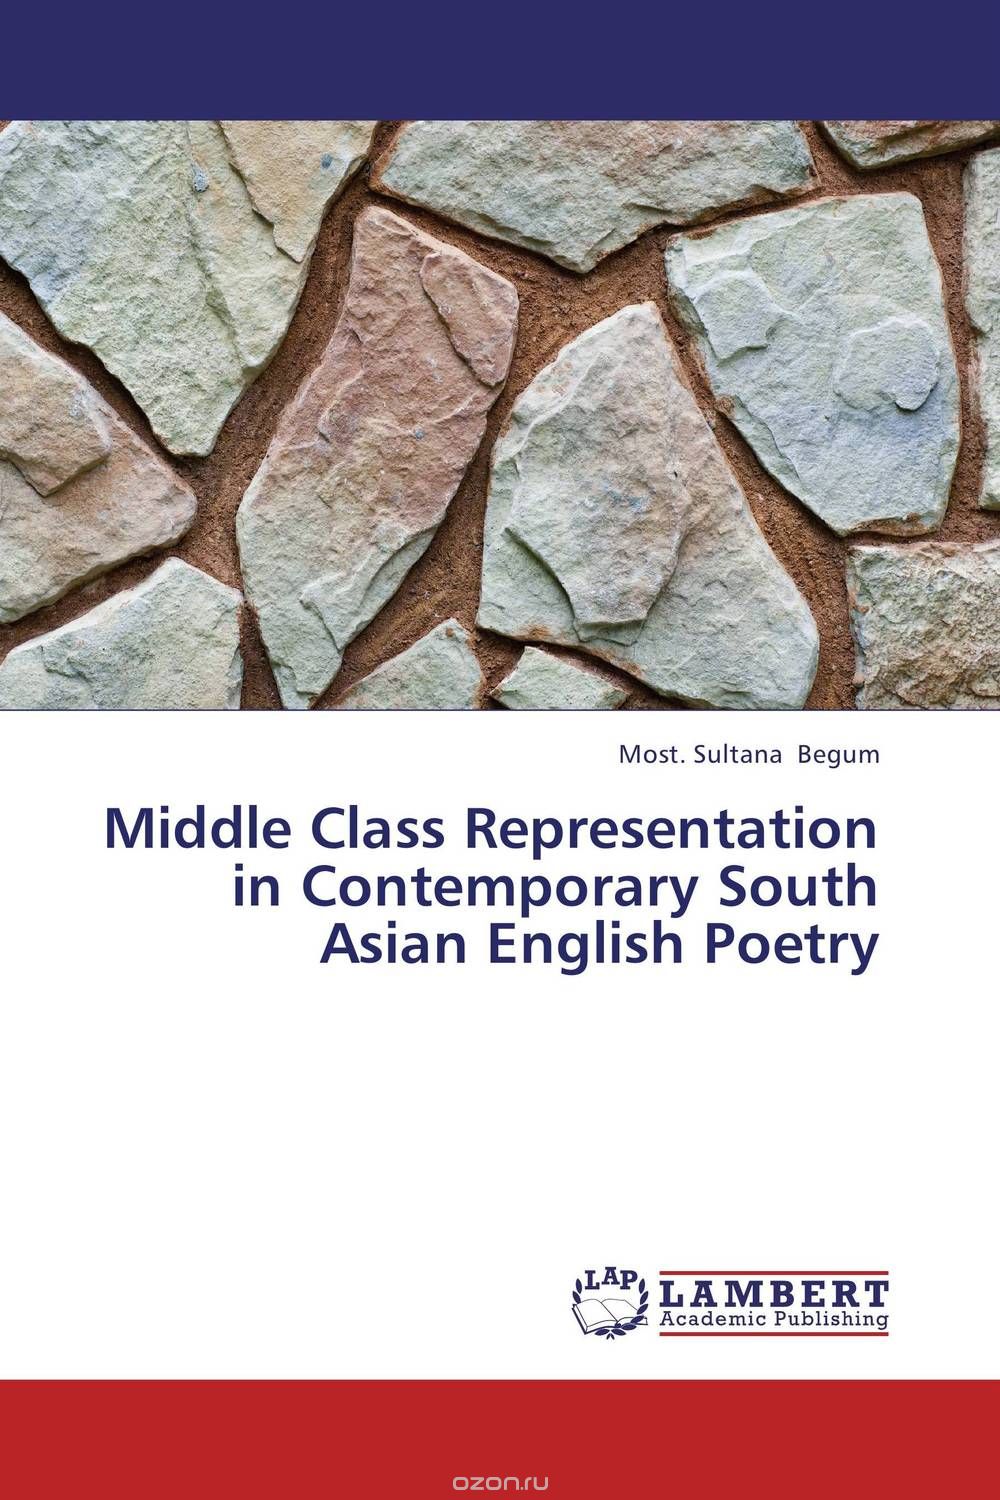 Скачать книгу "Middle Class Representation in Contemporary South Asian English Poetry"